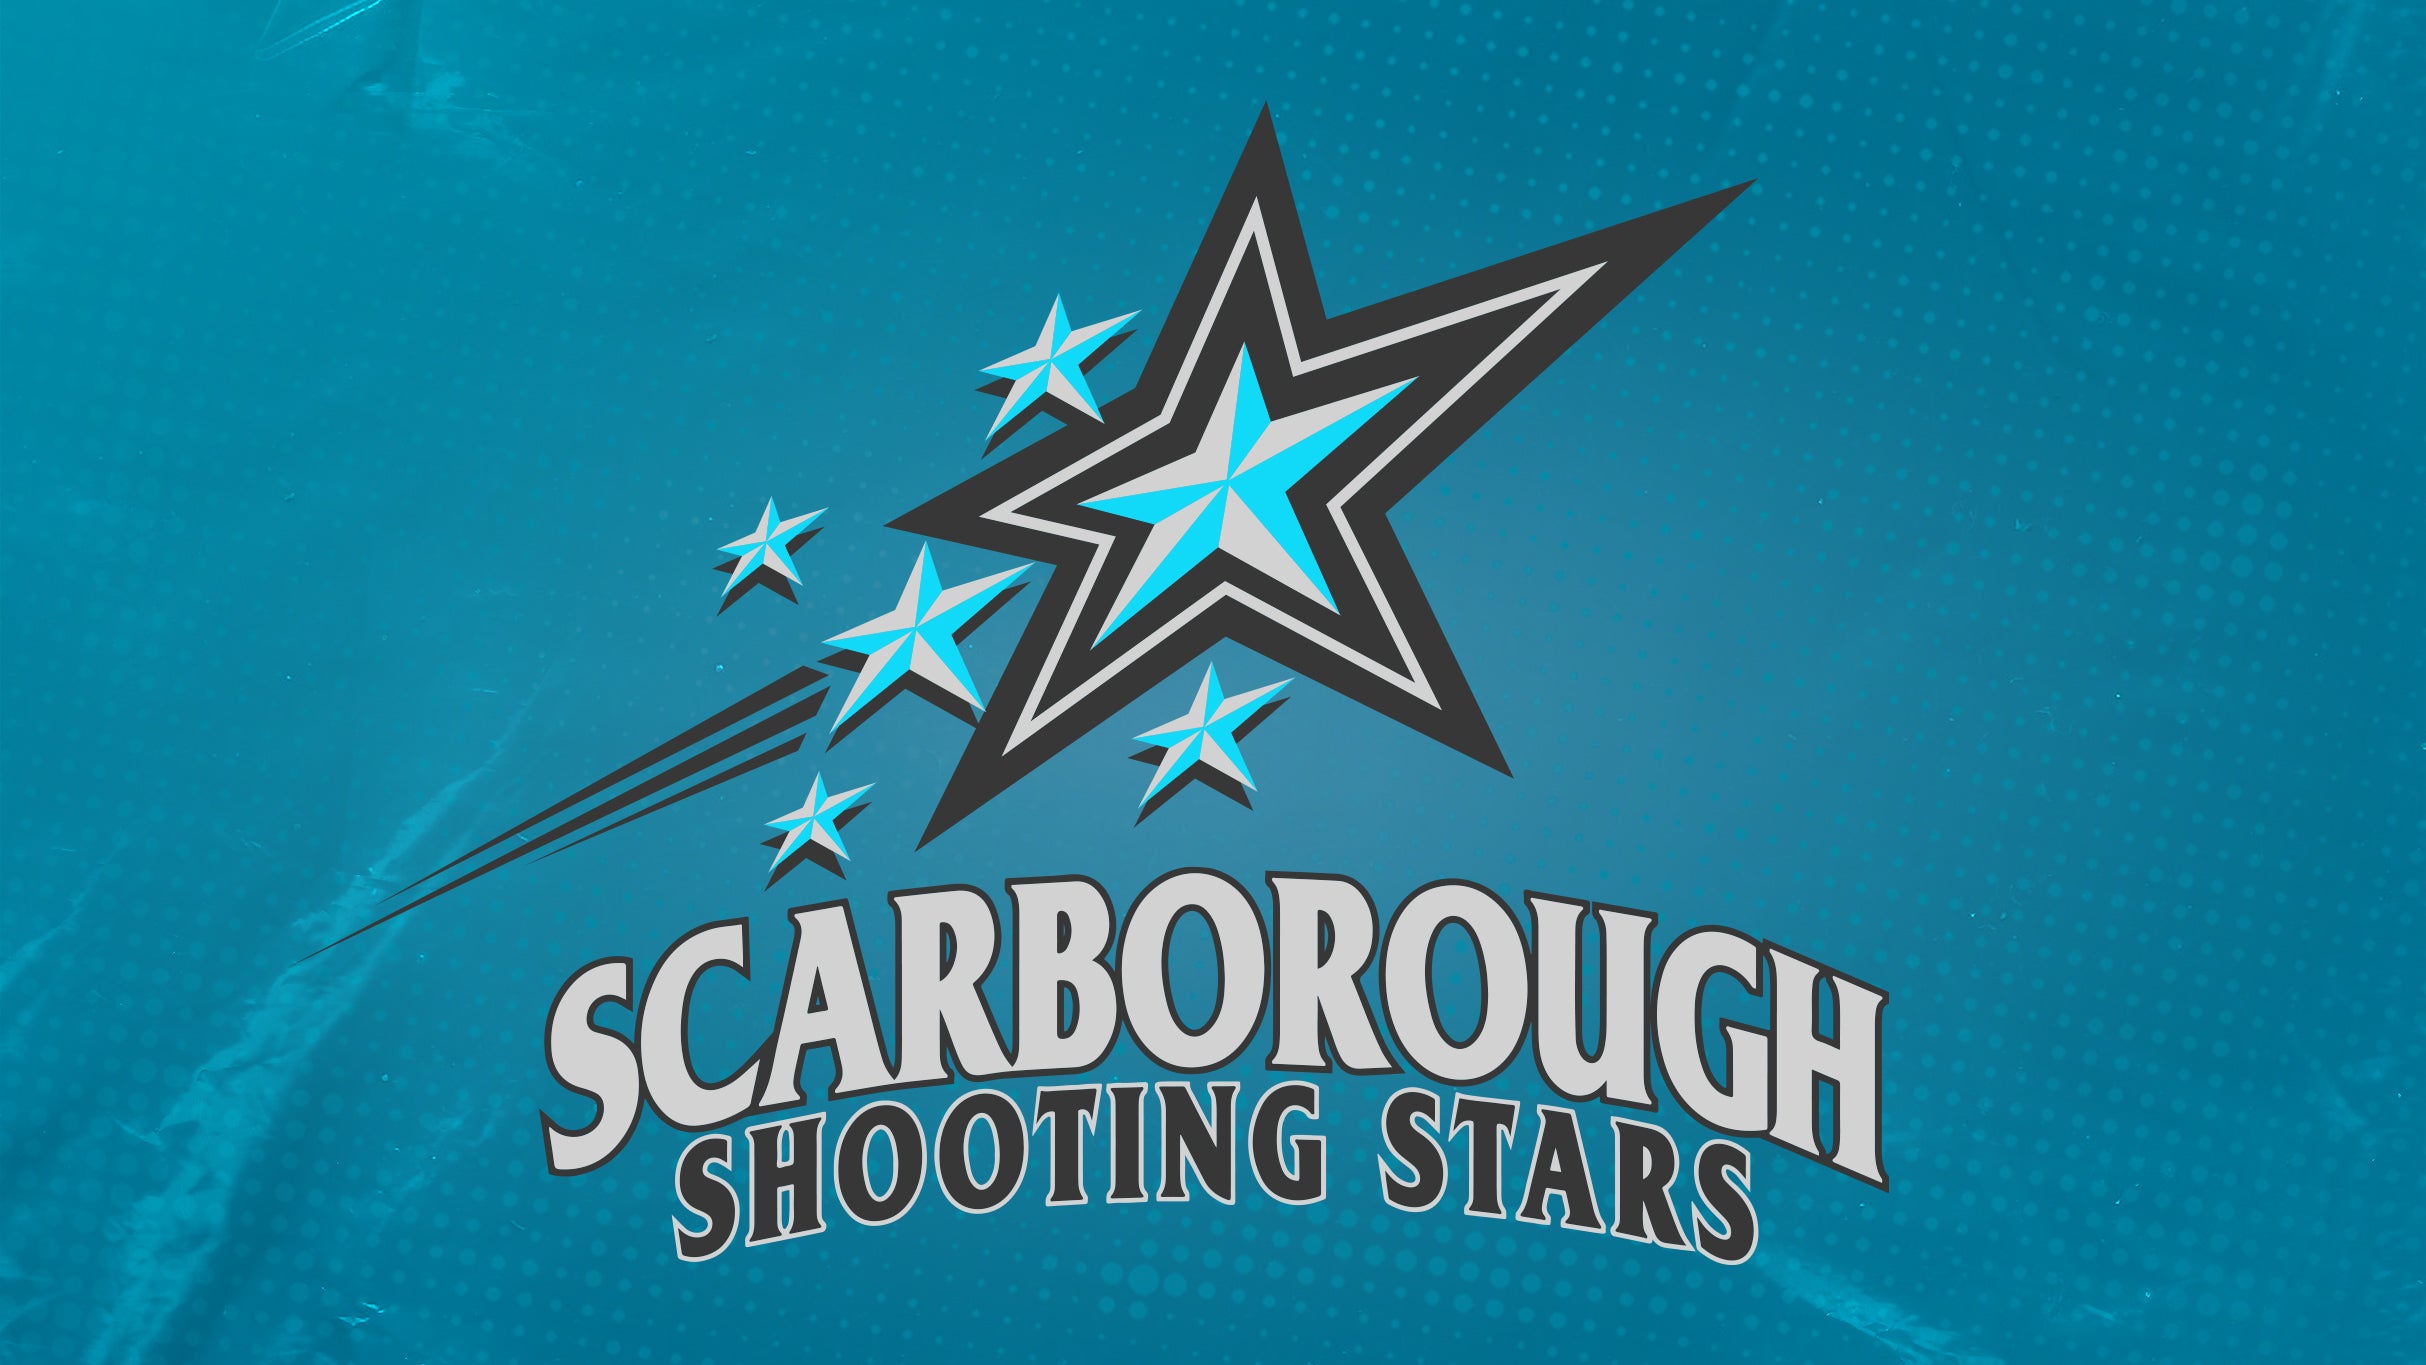 Scarborough Shooting Stars vs. Edmonton Stingers presale code for show tickets in Toronto, ON (Toronto Pan Am Sports Centre)